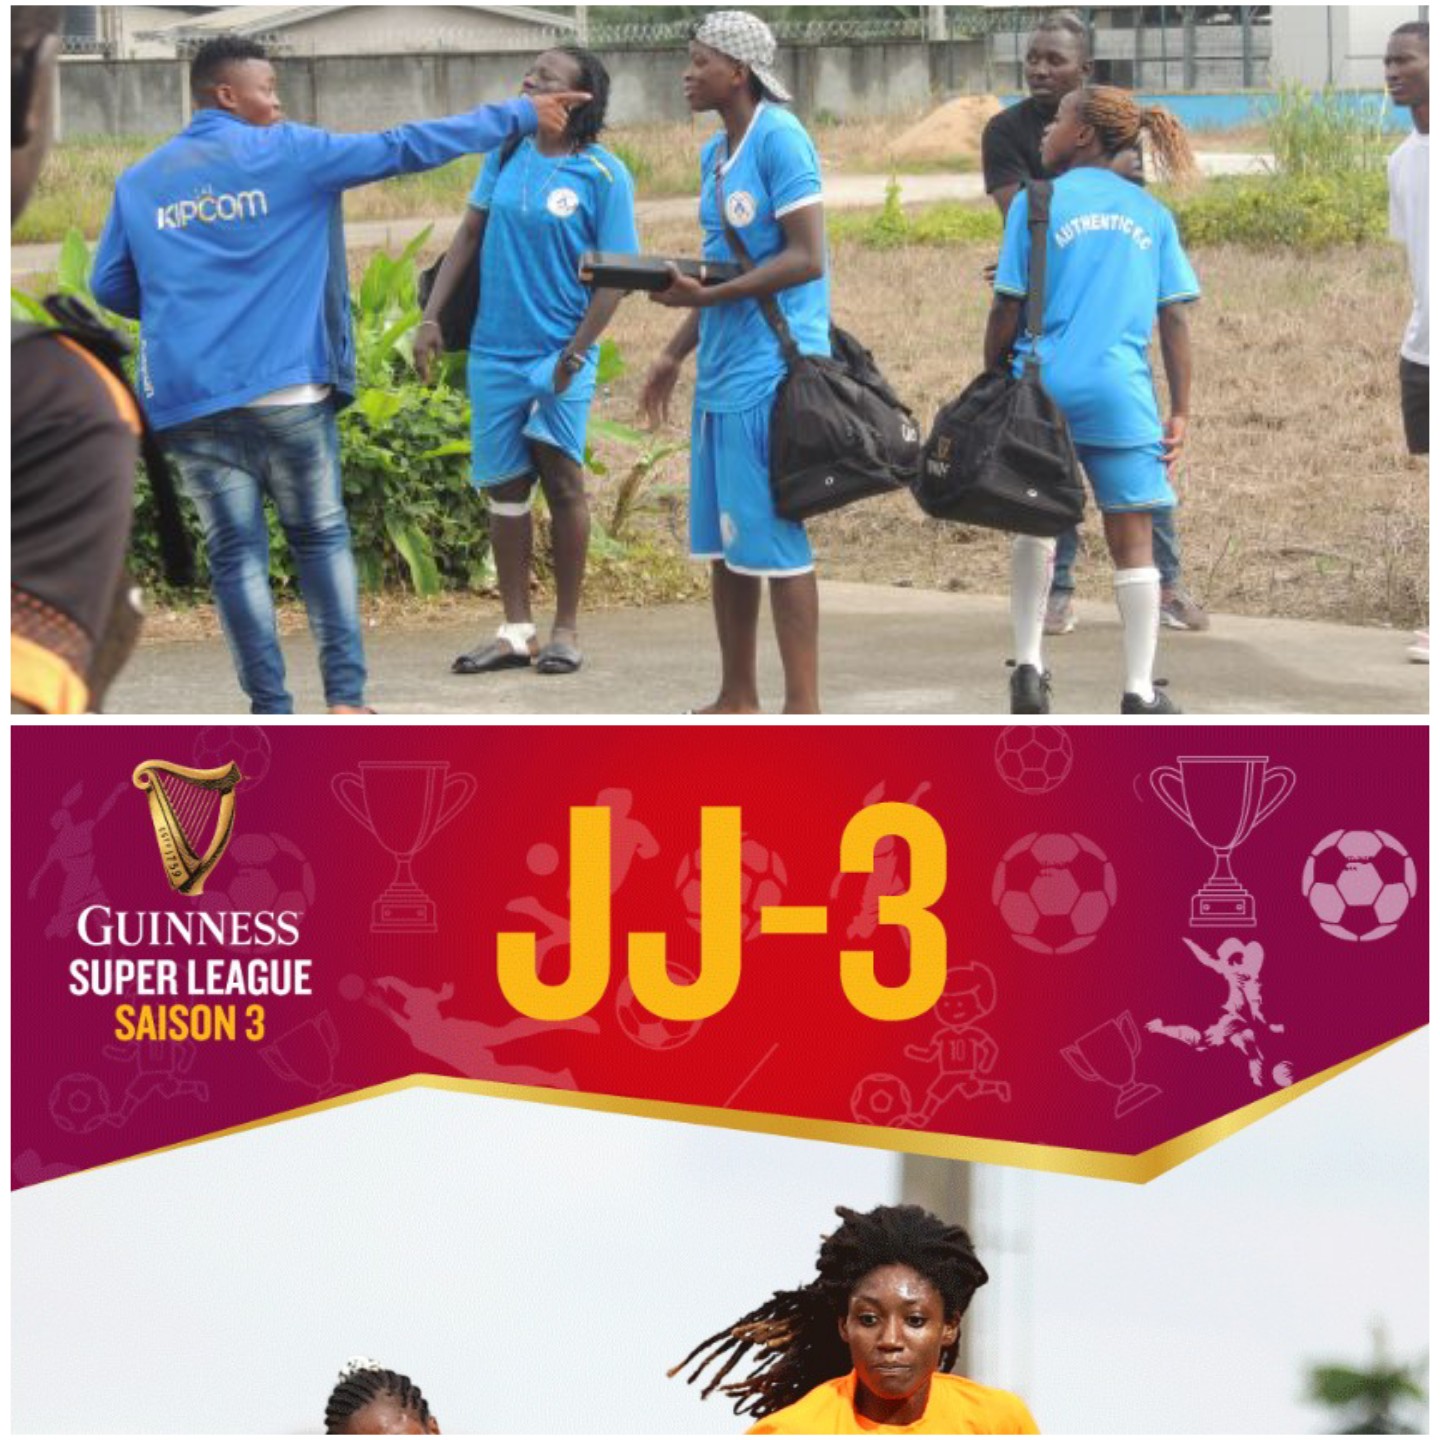 You are currently viewing Guinness Super League 2023: Authentic ladies new look sur les startings blocs